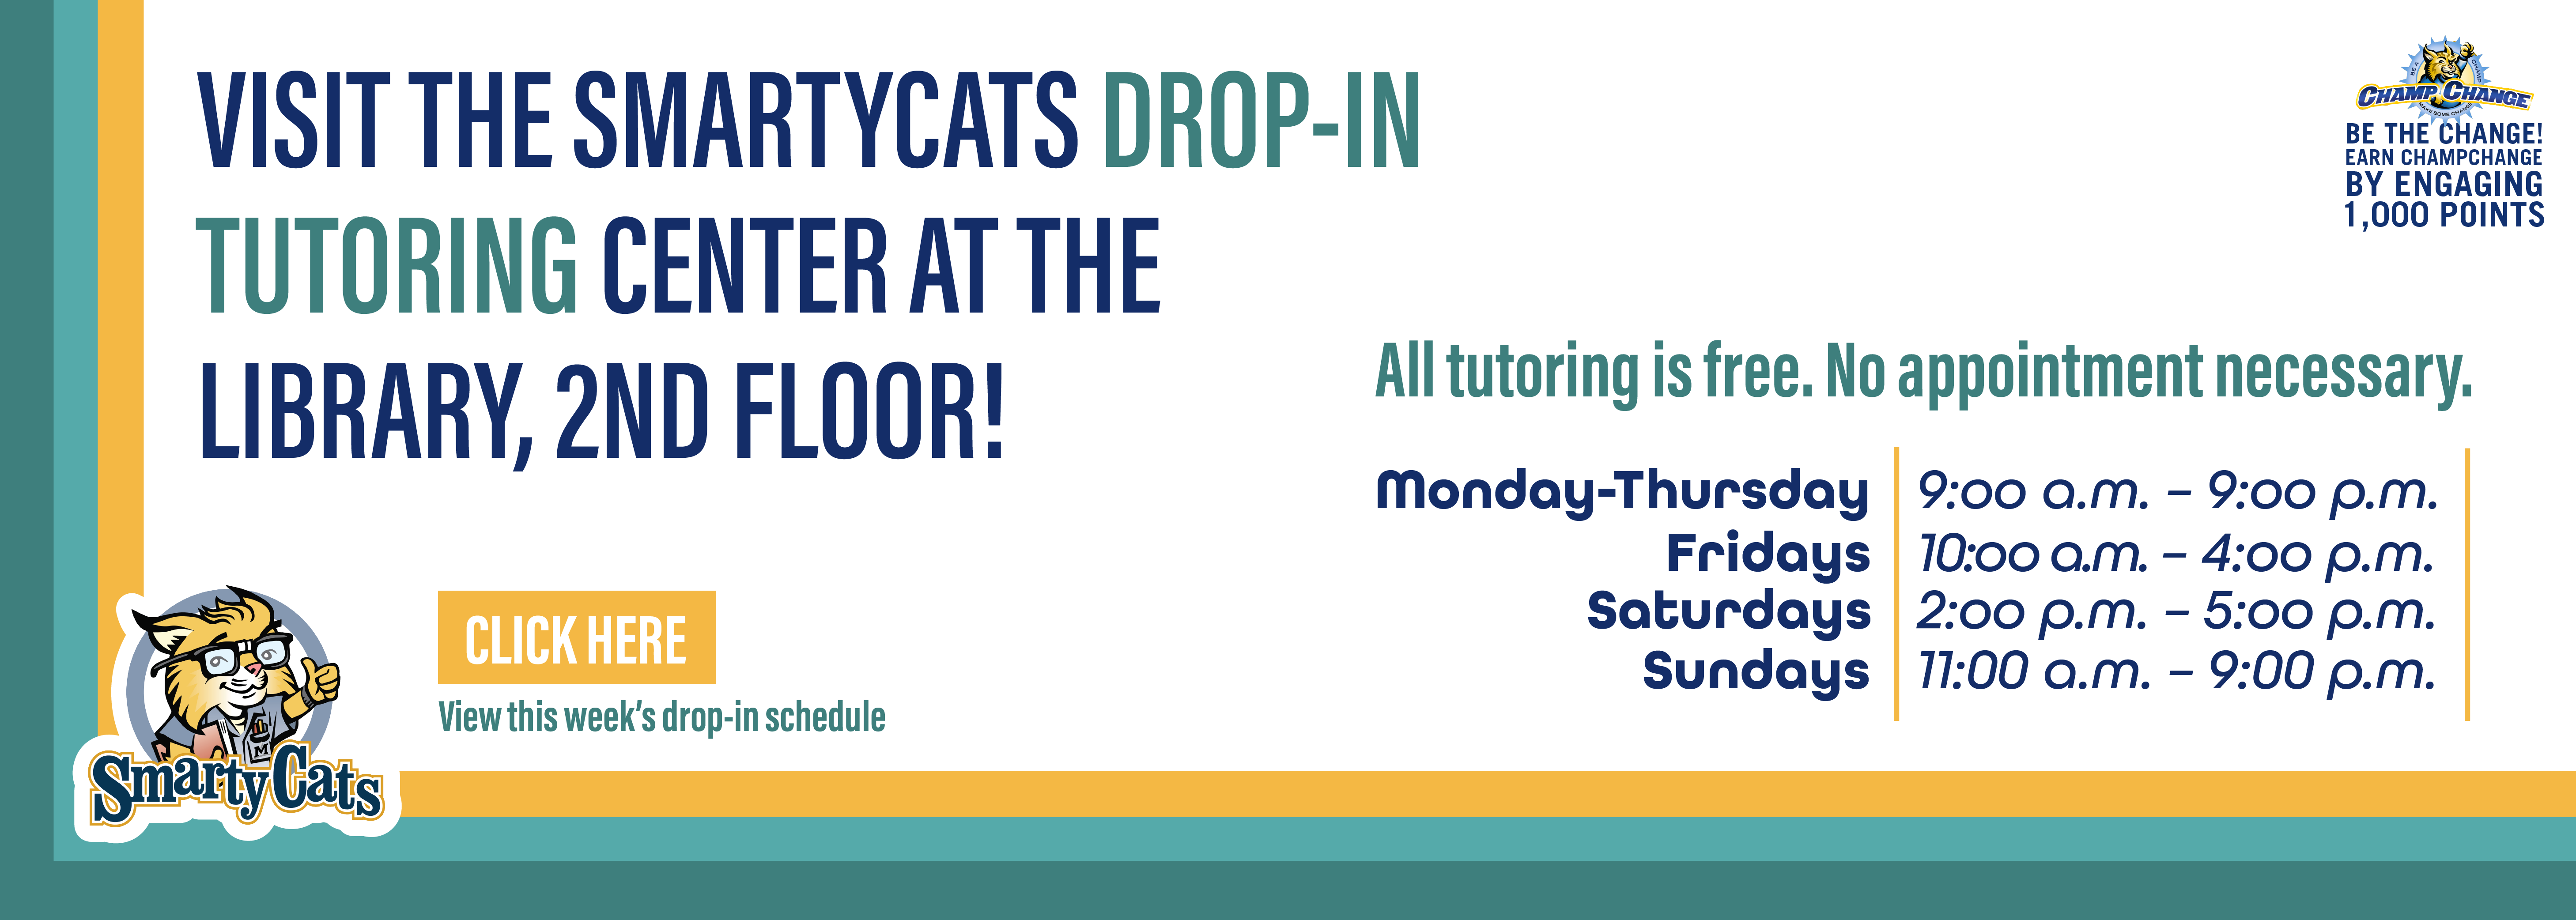 Visiting the Smartycats drop-in tutoring center at the library, 2nd floor
all tutoring is free, no appointment necessary